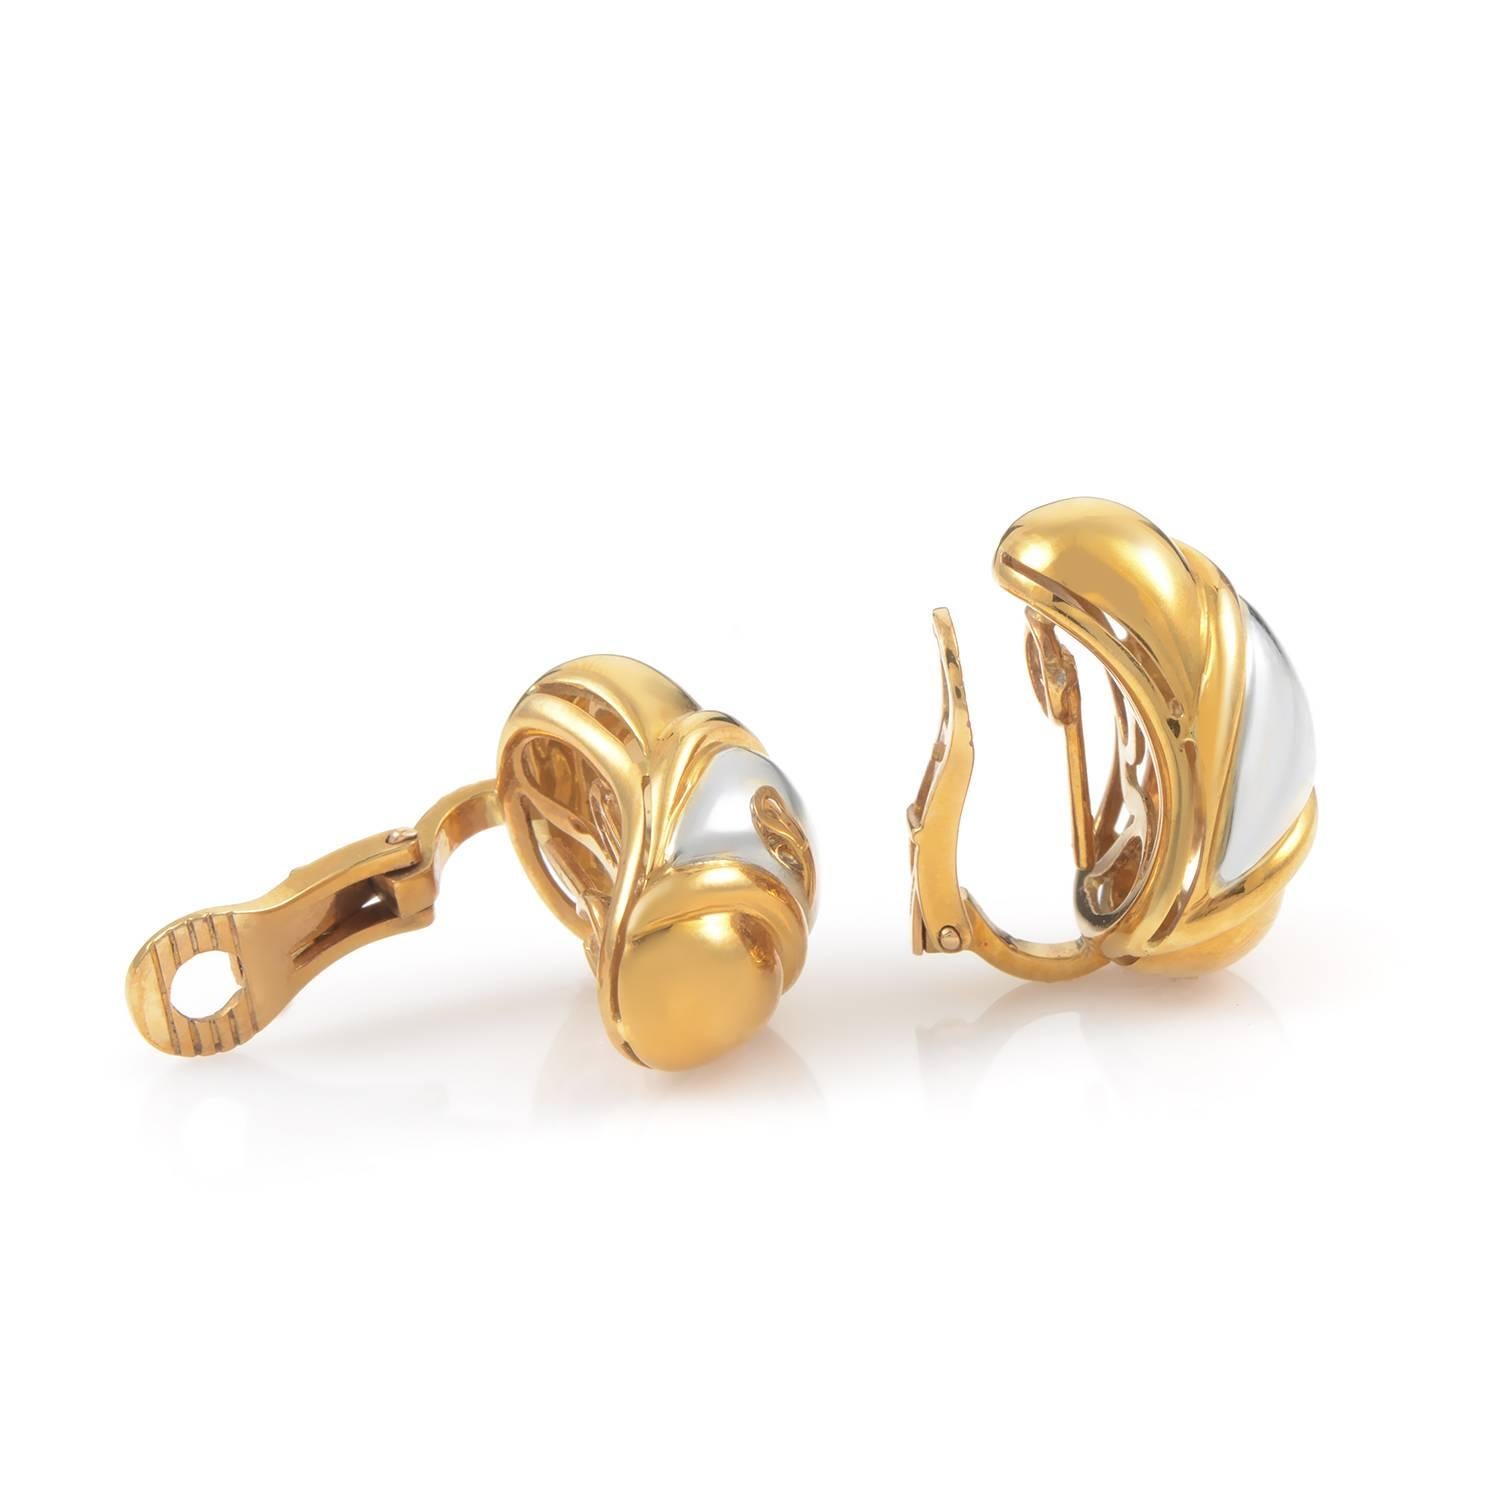 Golden and glorious are the perfect words to describe this pair of earrings from Bulgari. The earrings are made of primarily 18K yellow gold and are accented with 18K white gold.
Included Items: Manufacturer's Box